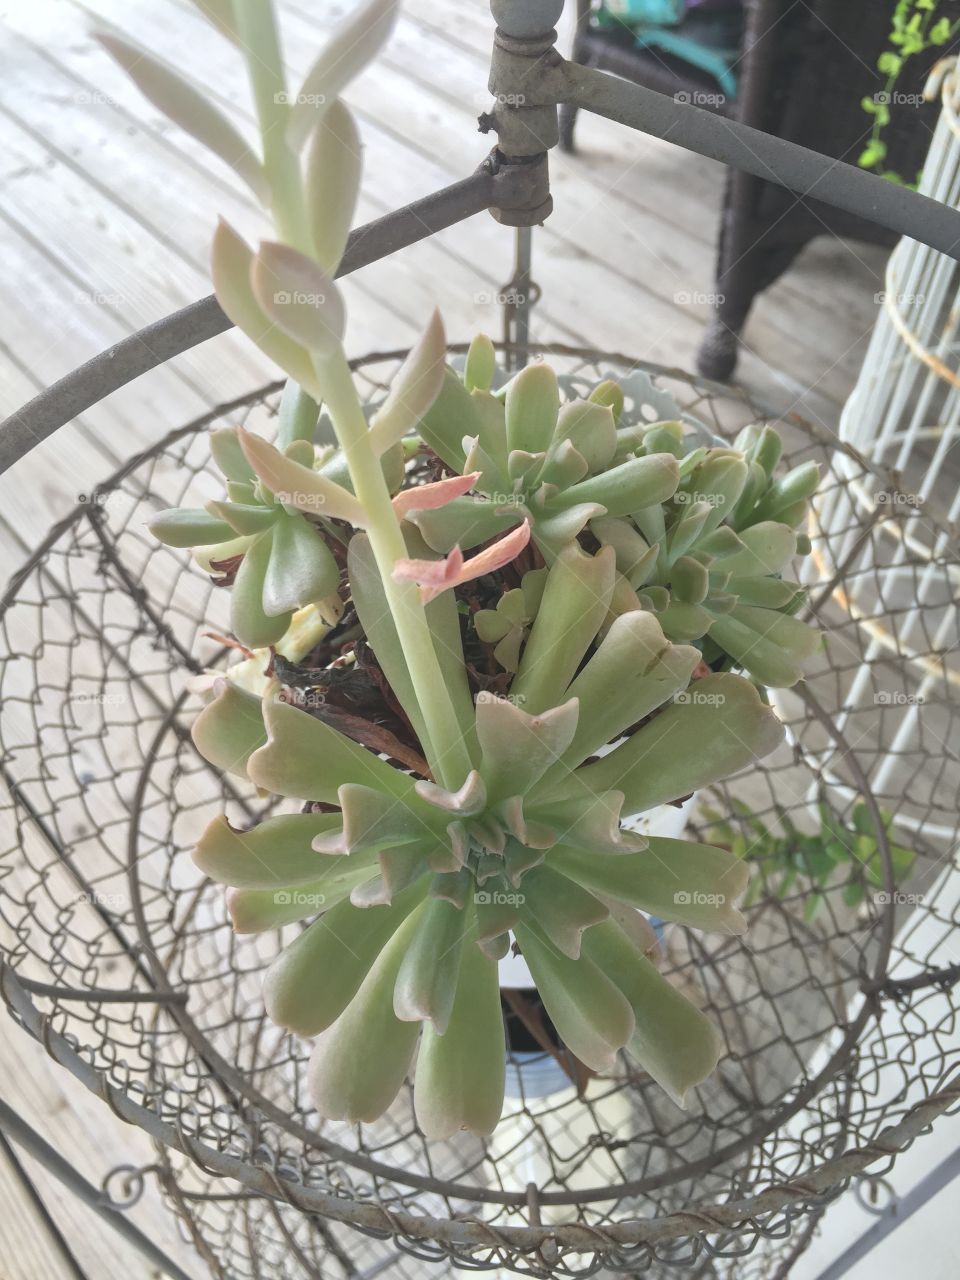 Succulent in a wire basket